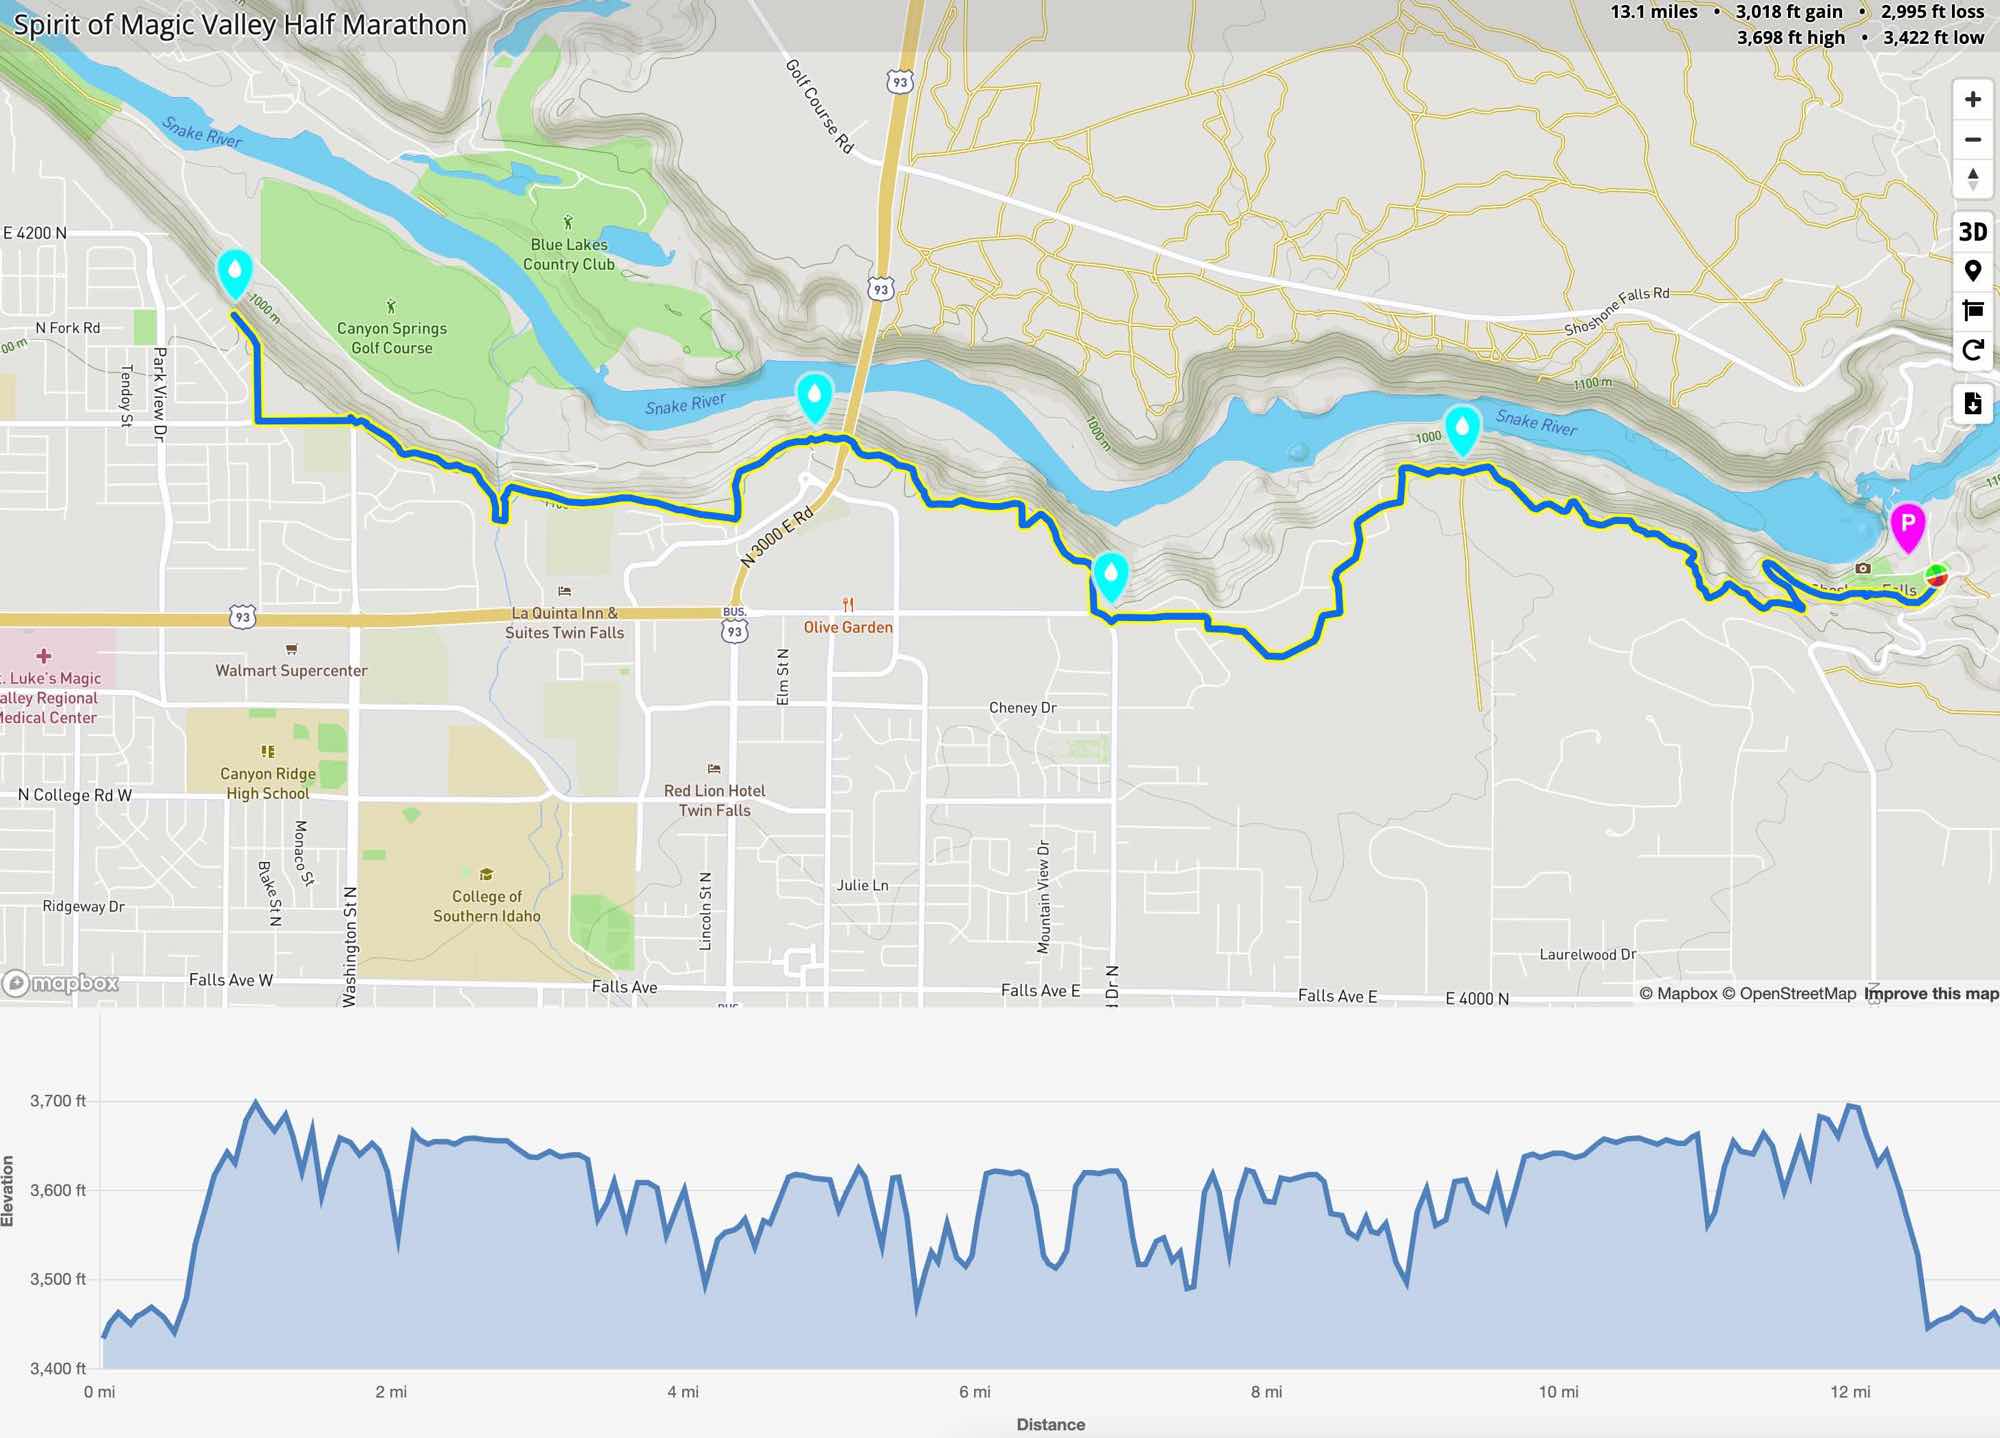 Map and elevation profile for the Spirit of Magic Valley Half Marathon